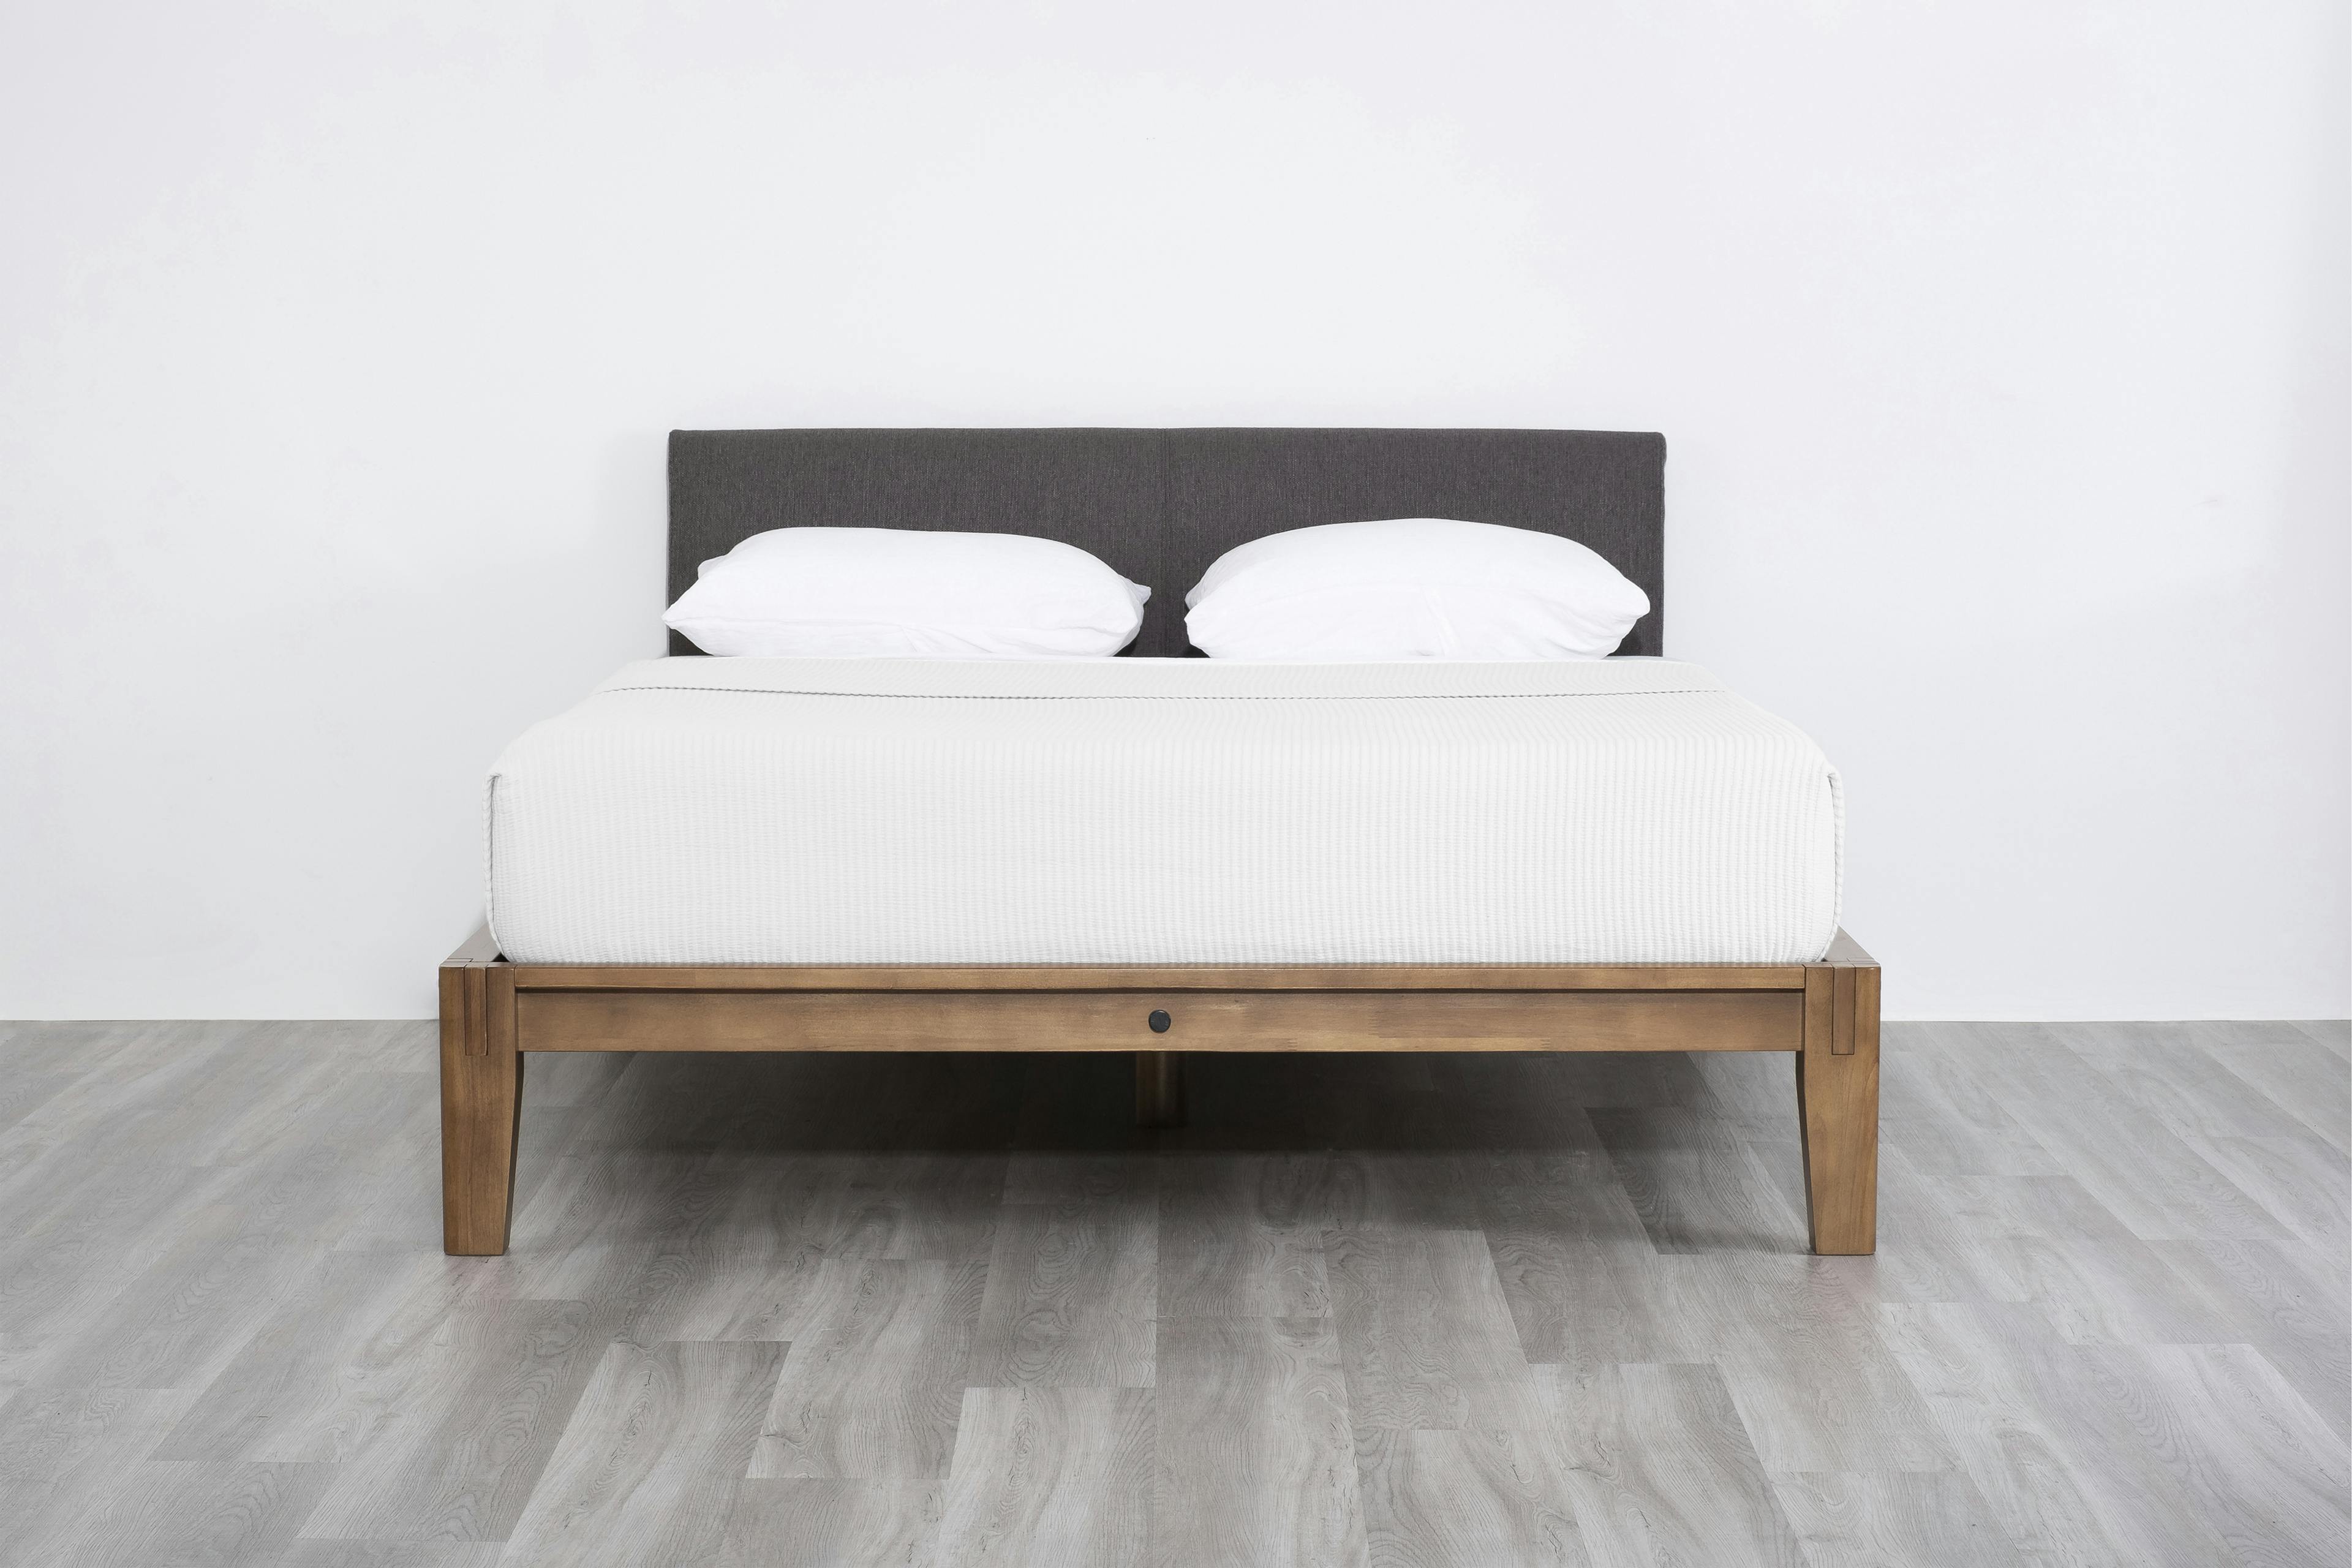 The Bed in Walnut and Dark Charcoal Colorway